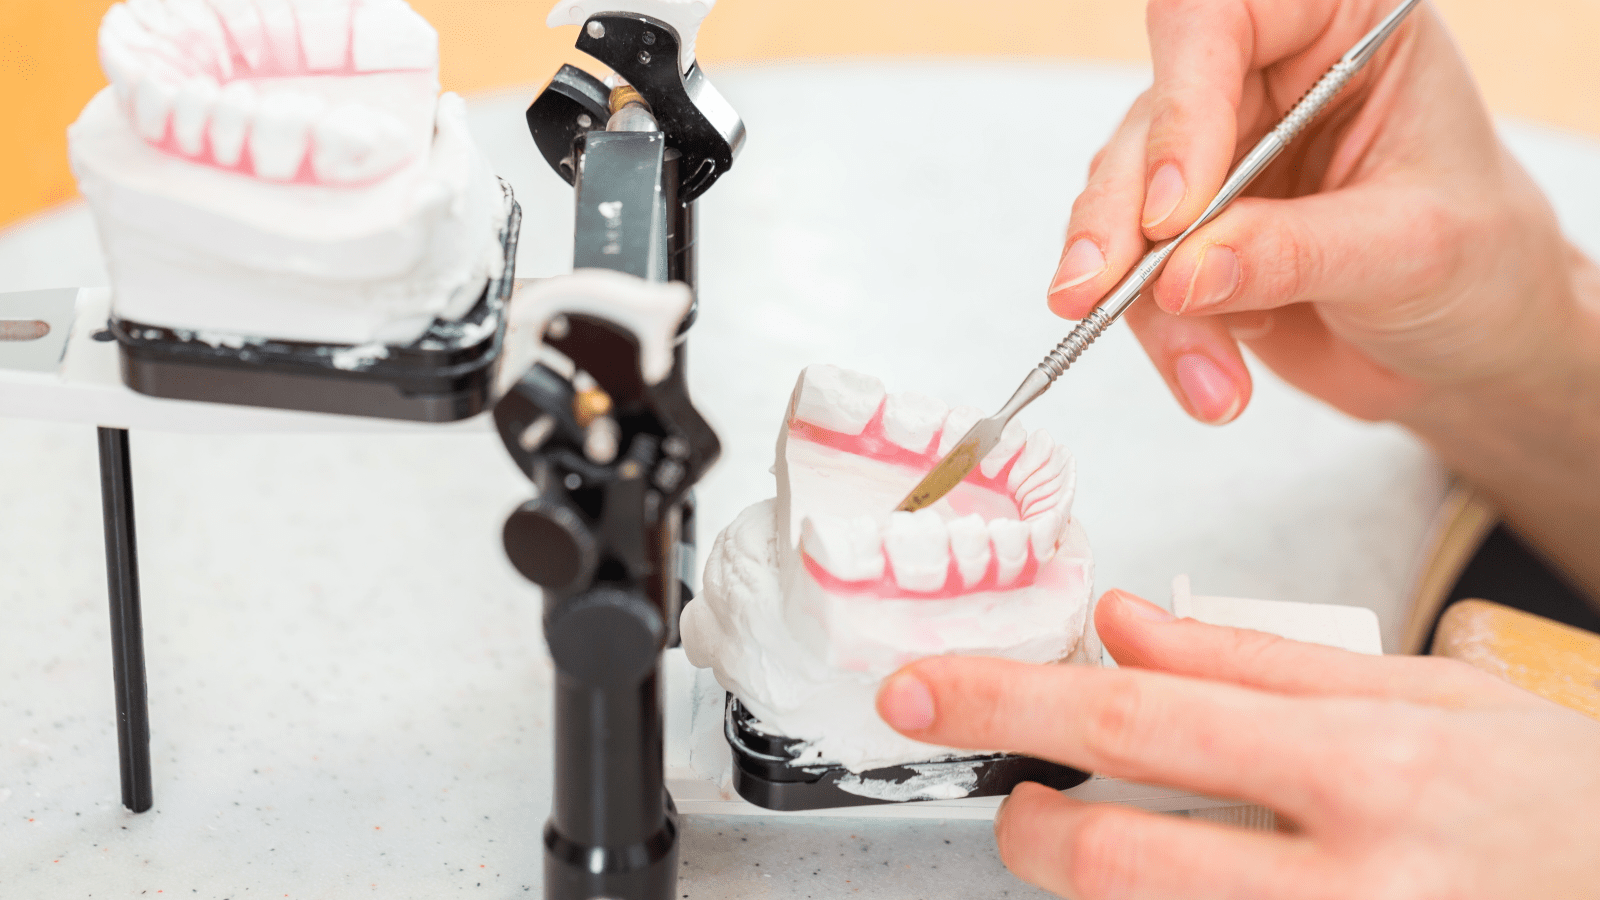 Image of Dental Prosthetic Being Painted